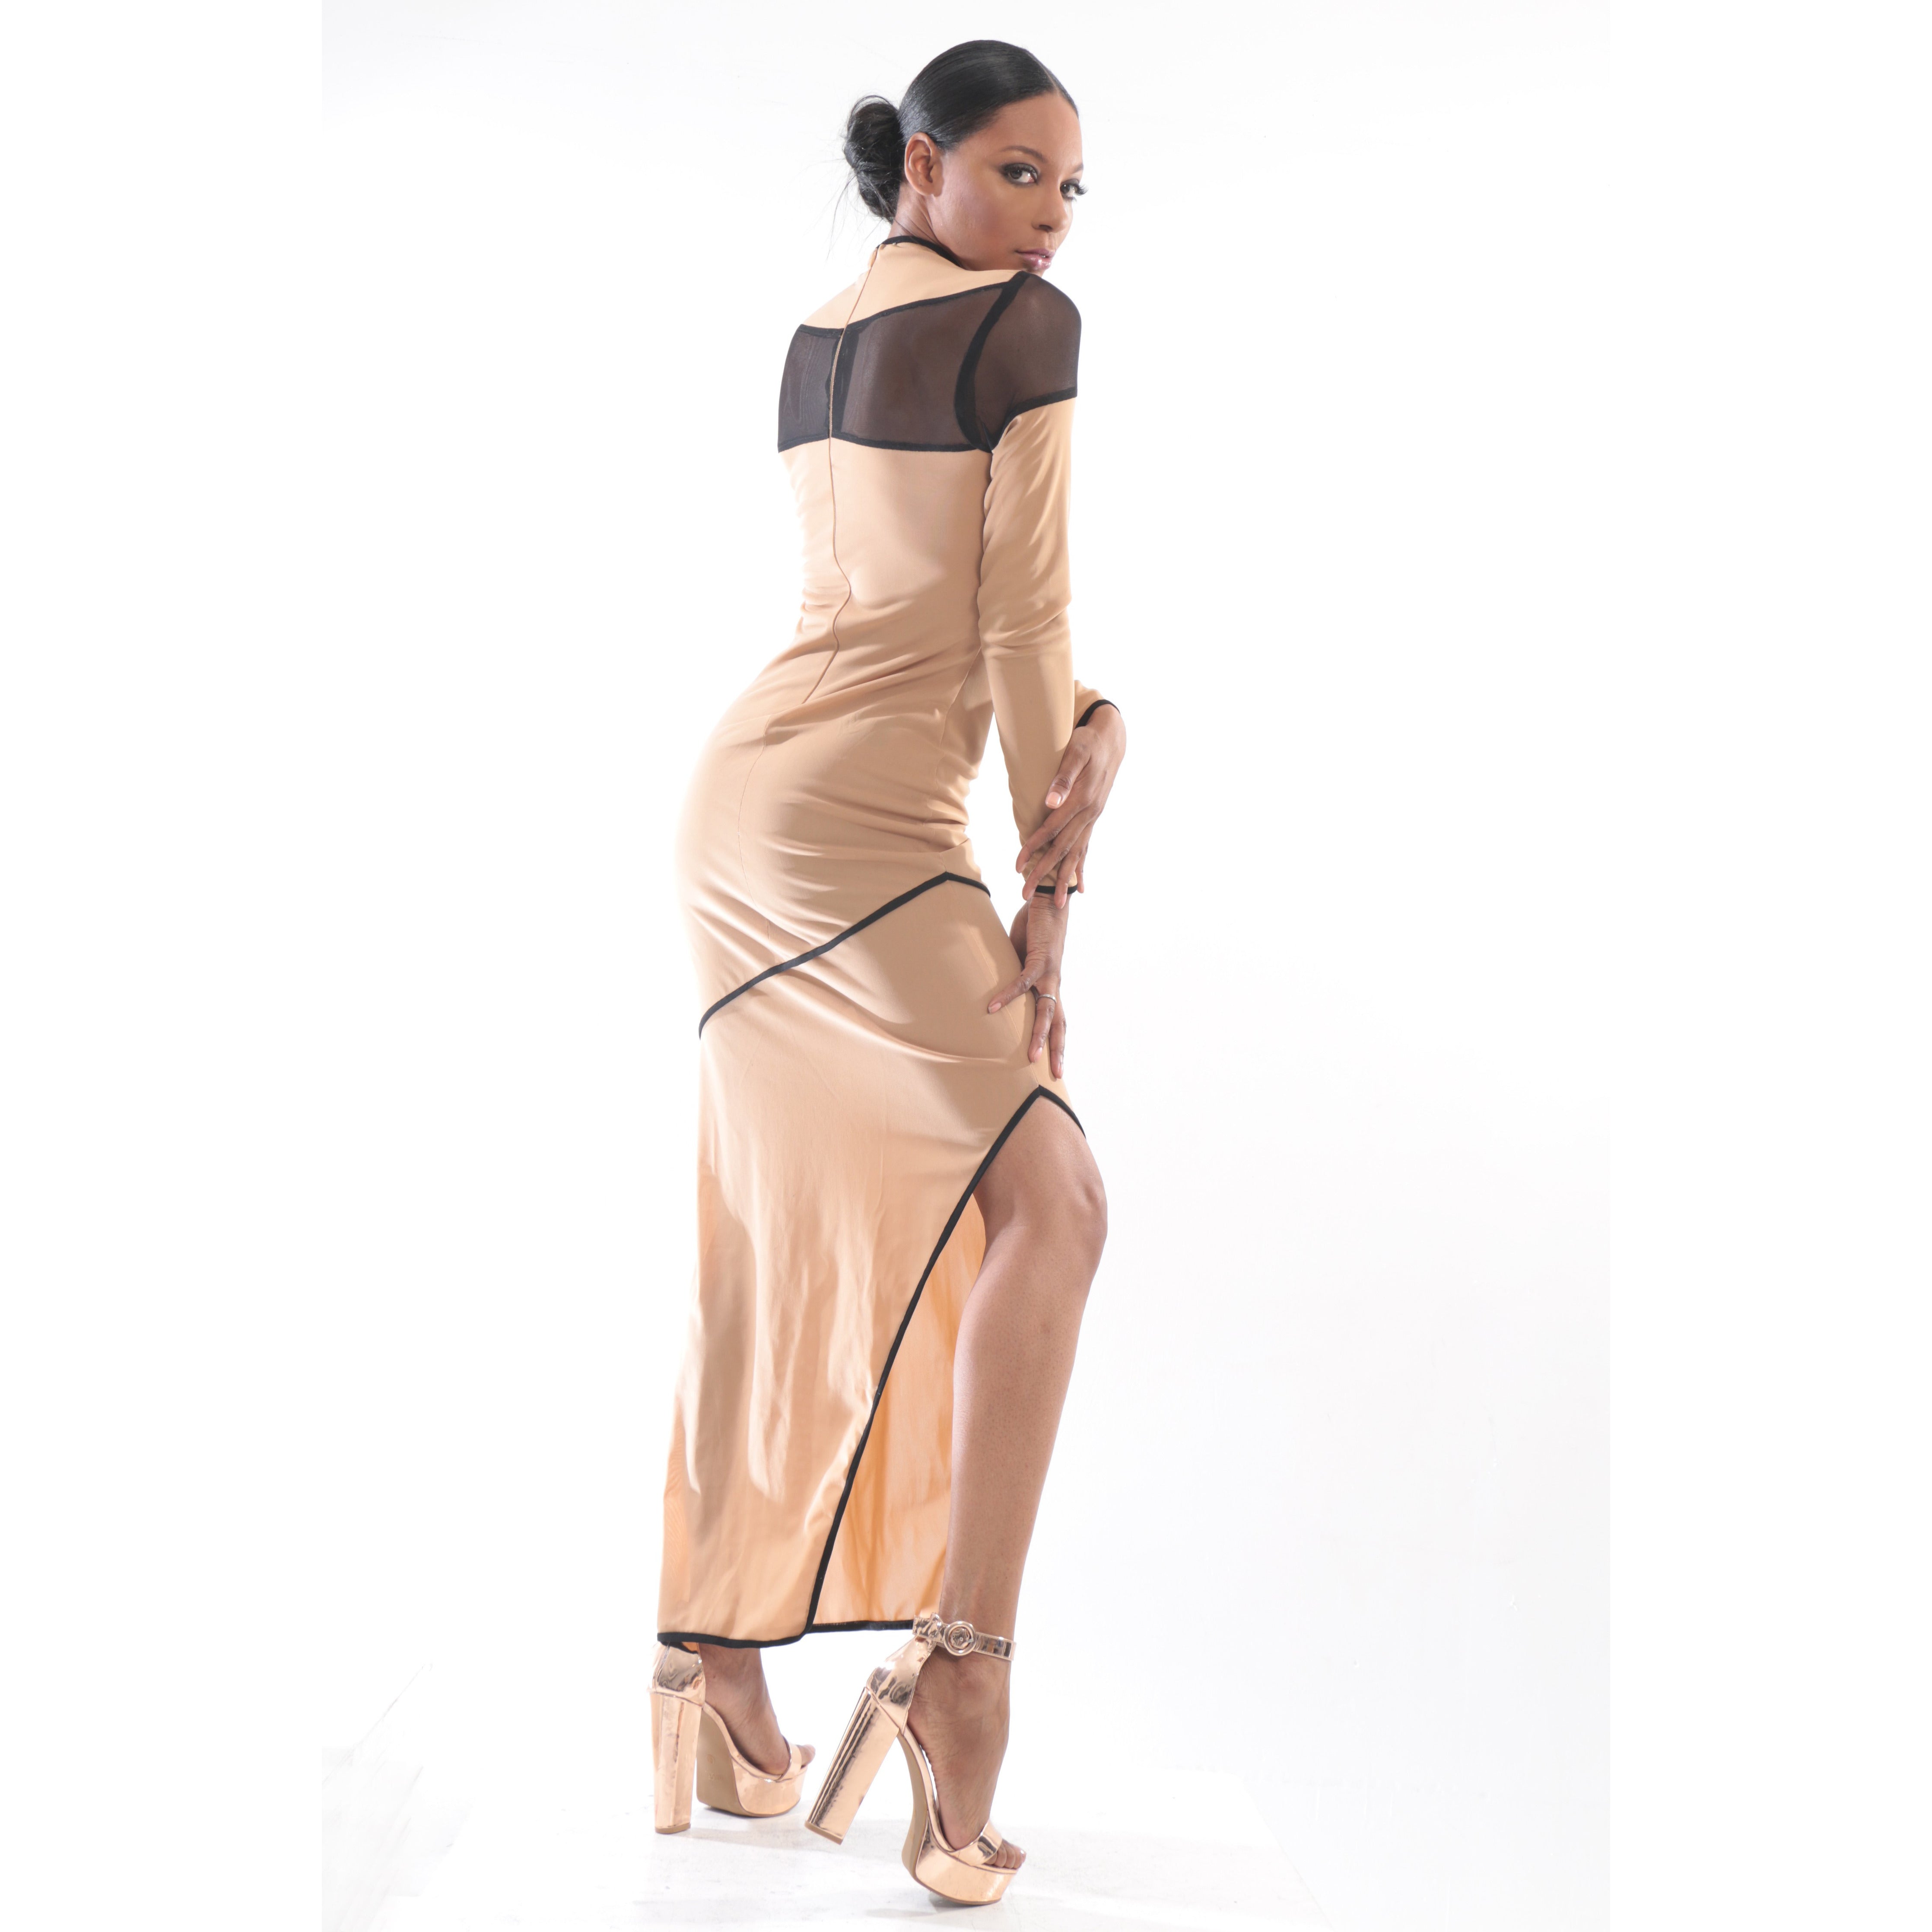 Tan gown with black mesh